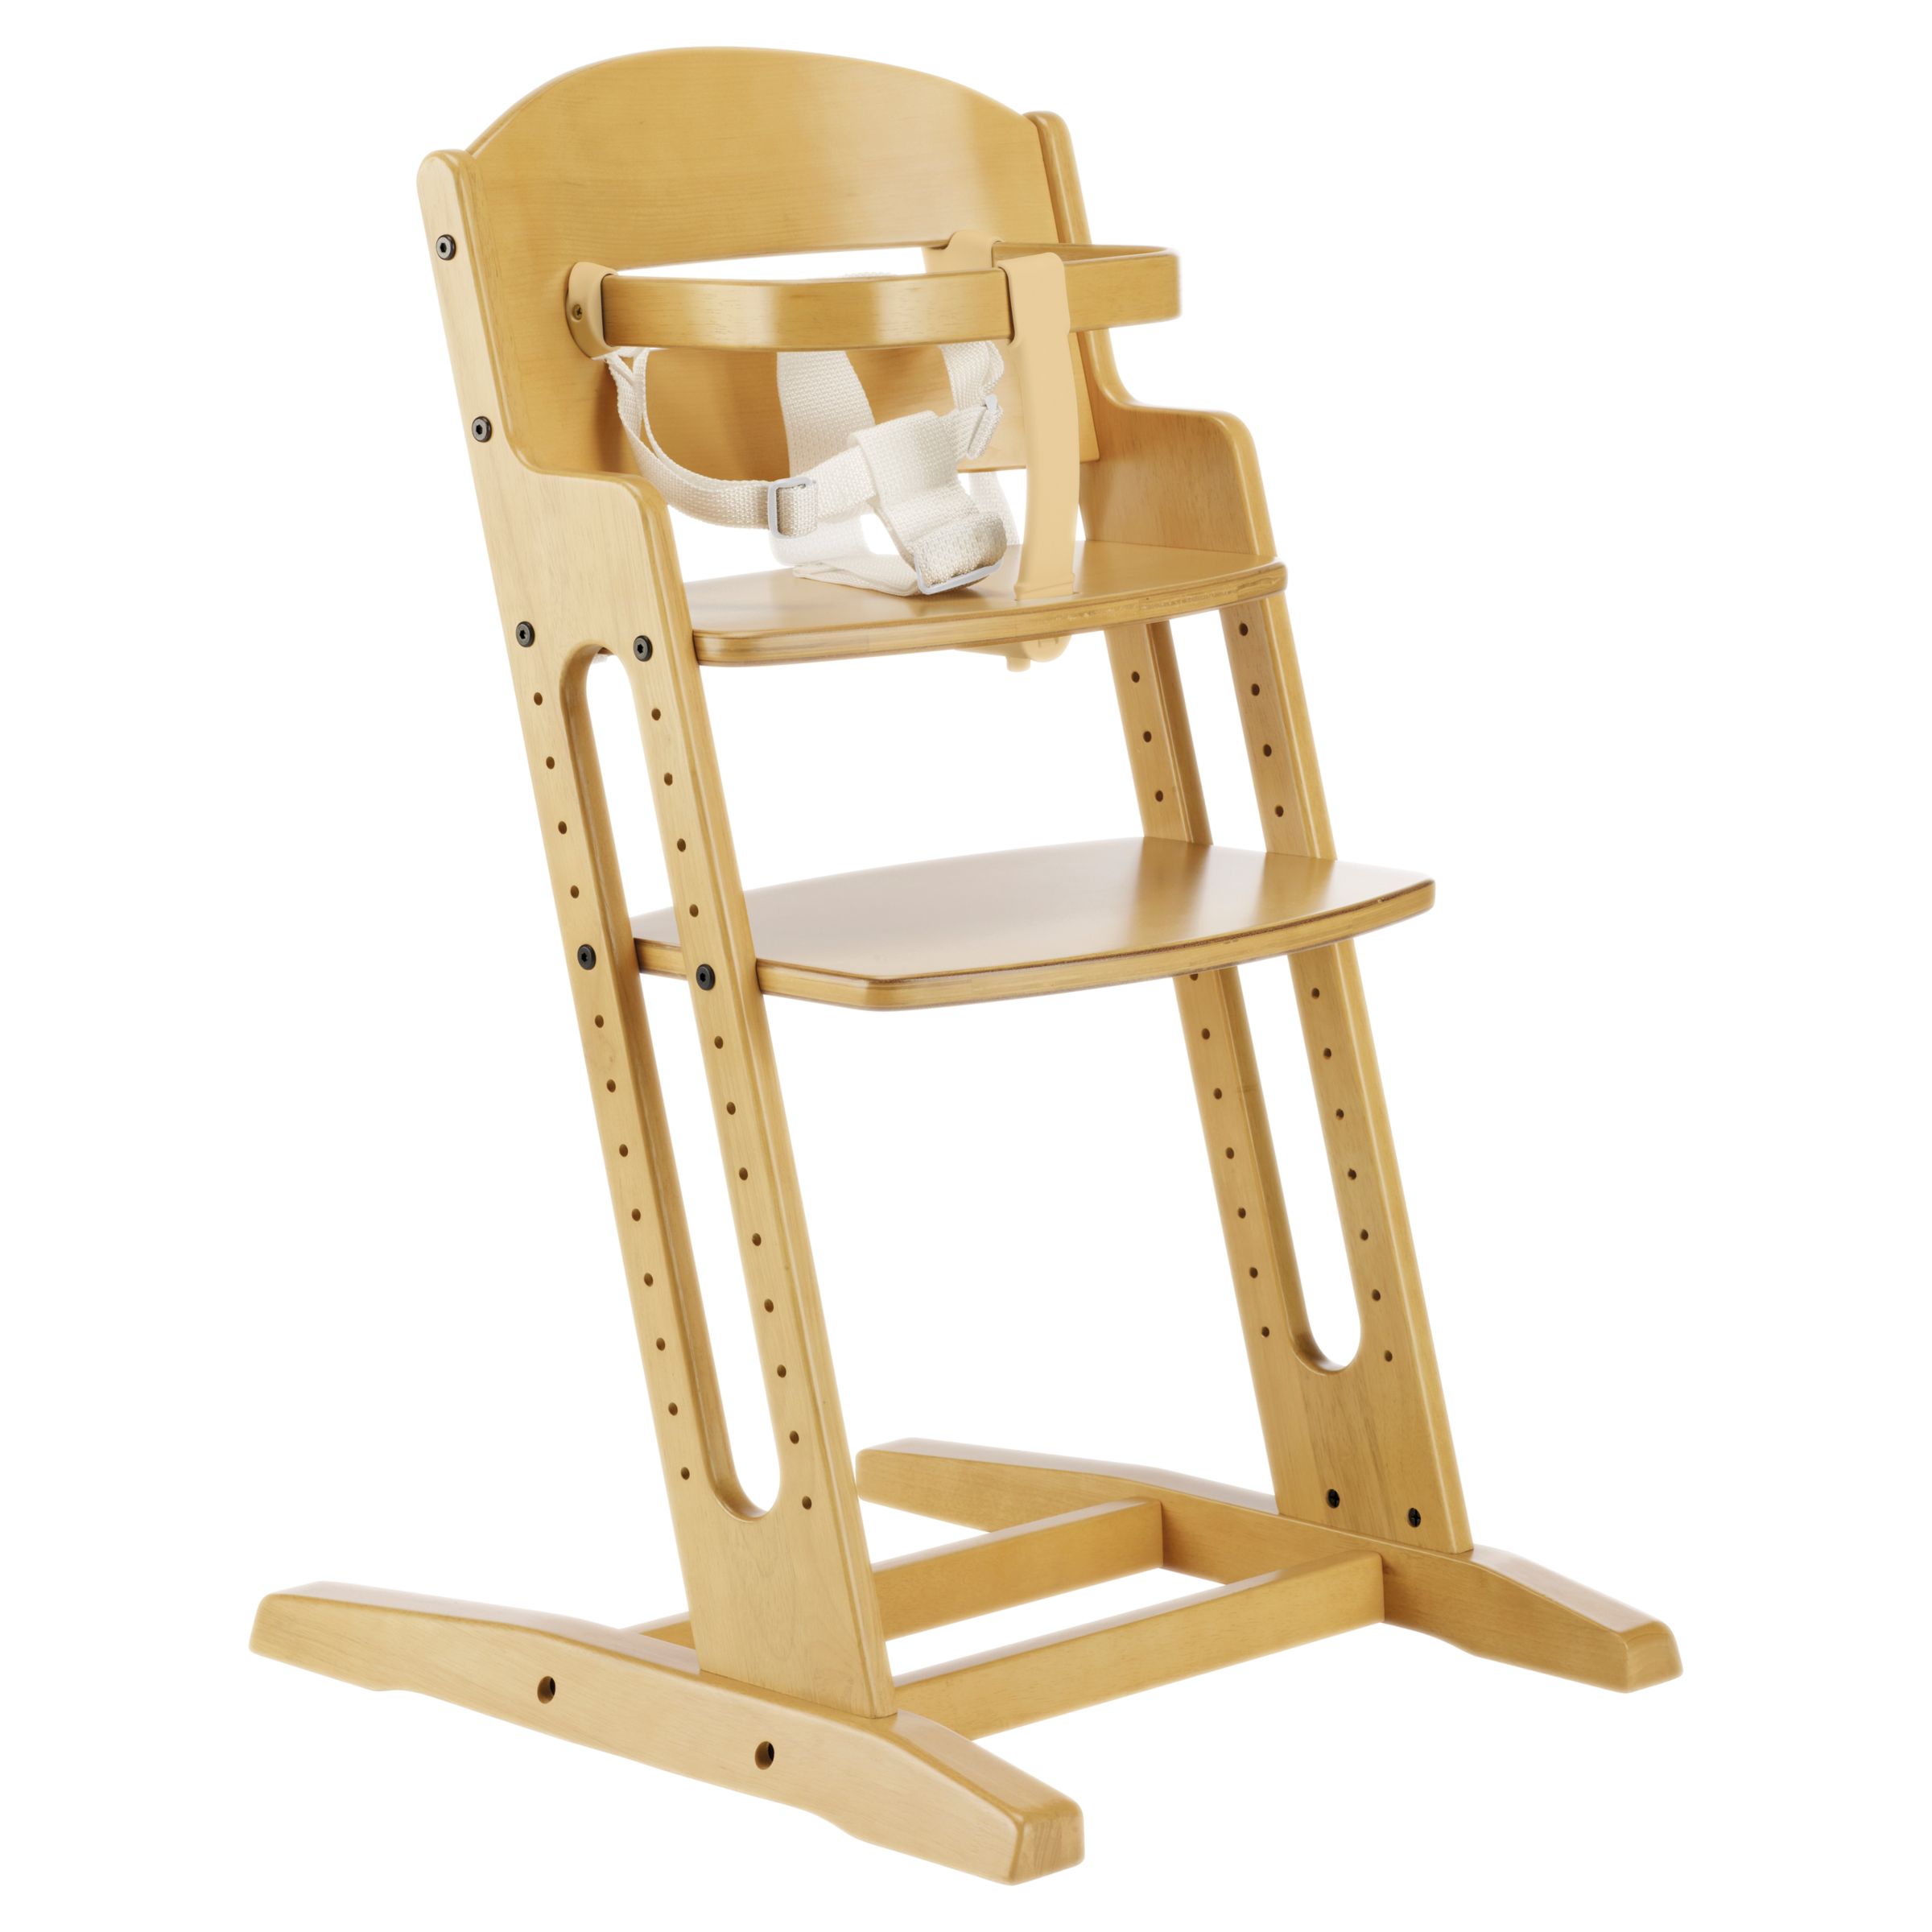 Wooden Baby High Chair John Lewis  : Graco, Fisher Price, Peg Perego, Stokke, & More On Kijiji, Canada�s #1 Local Classifieds.